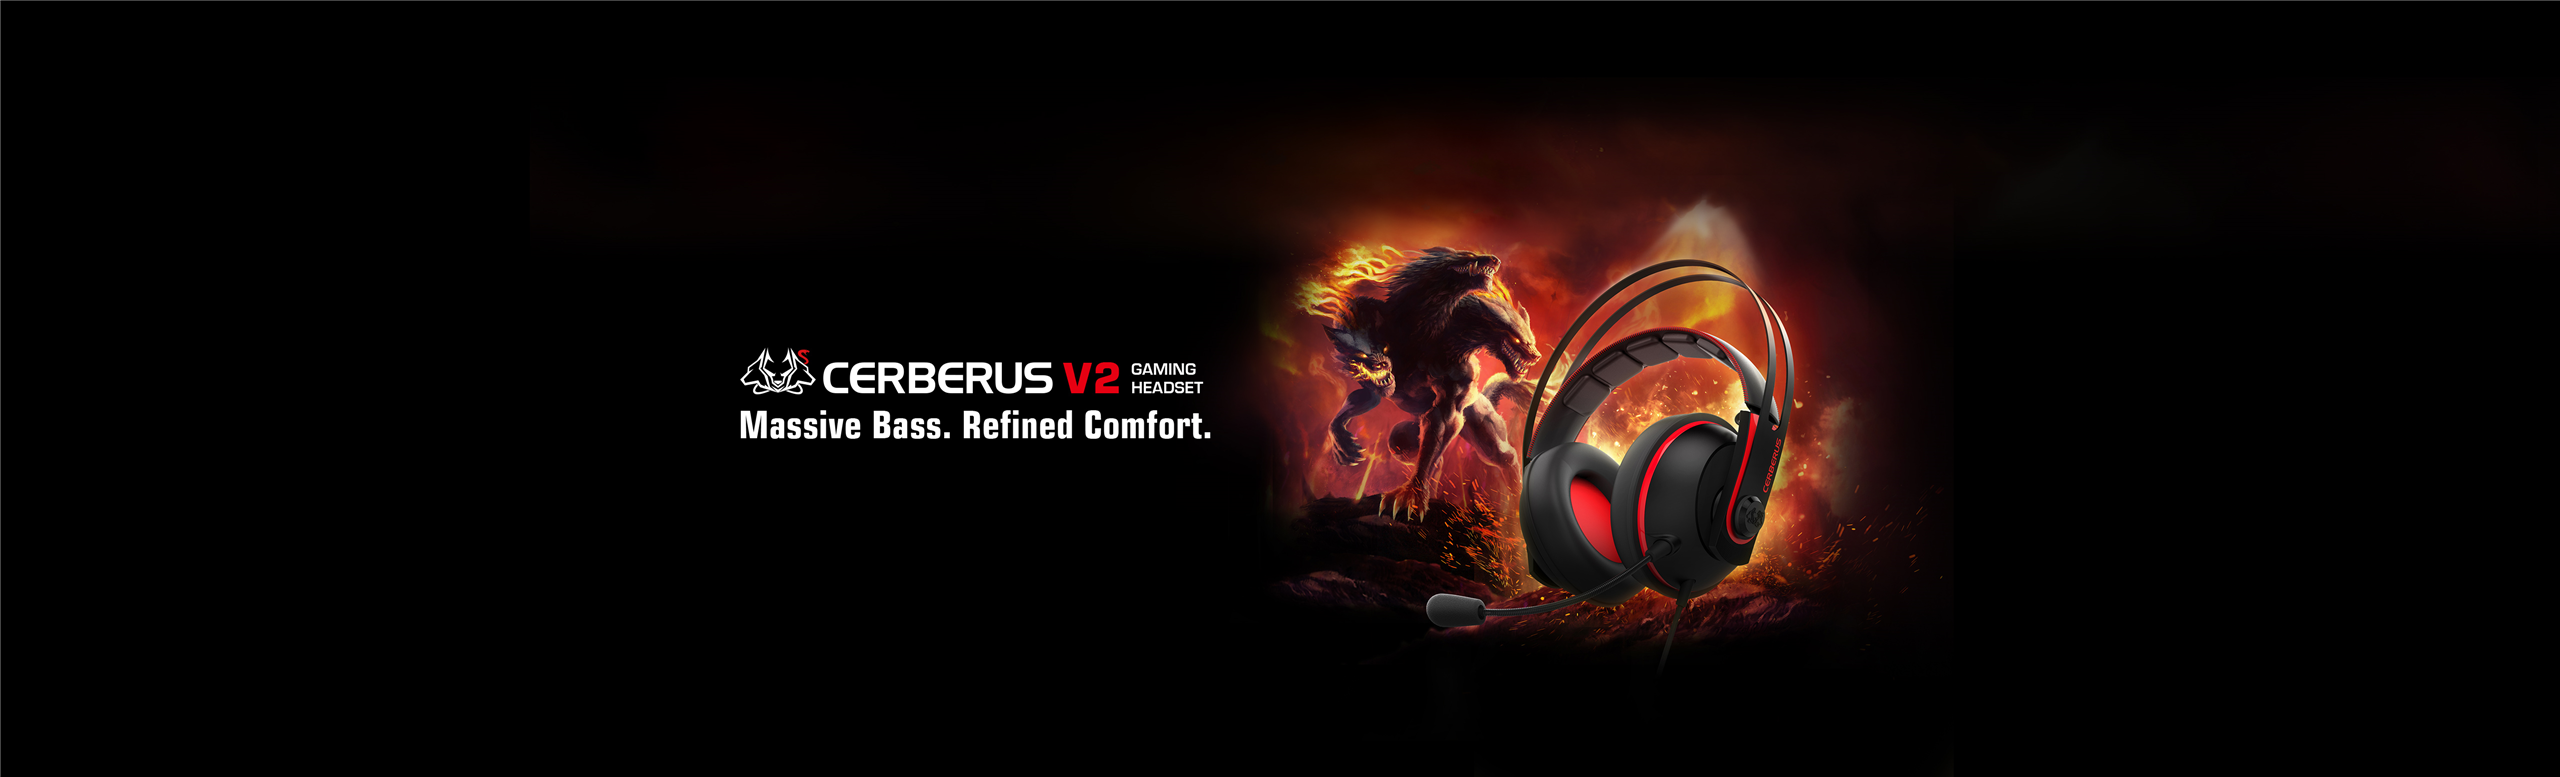 Cerberus V2 gaming headset product photo with the mythical dog Cerberus in the background